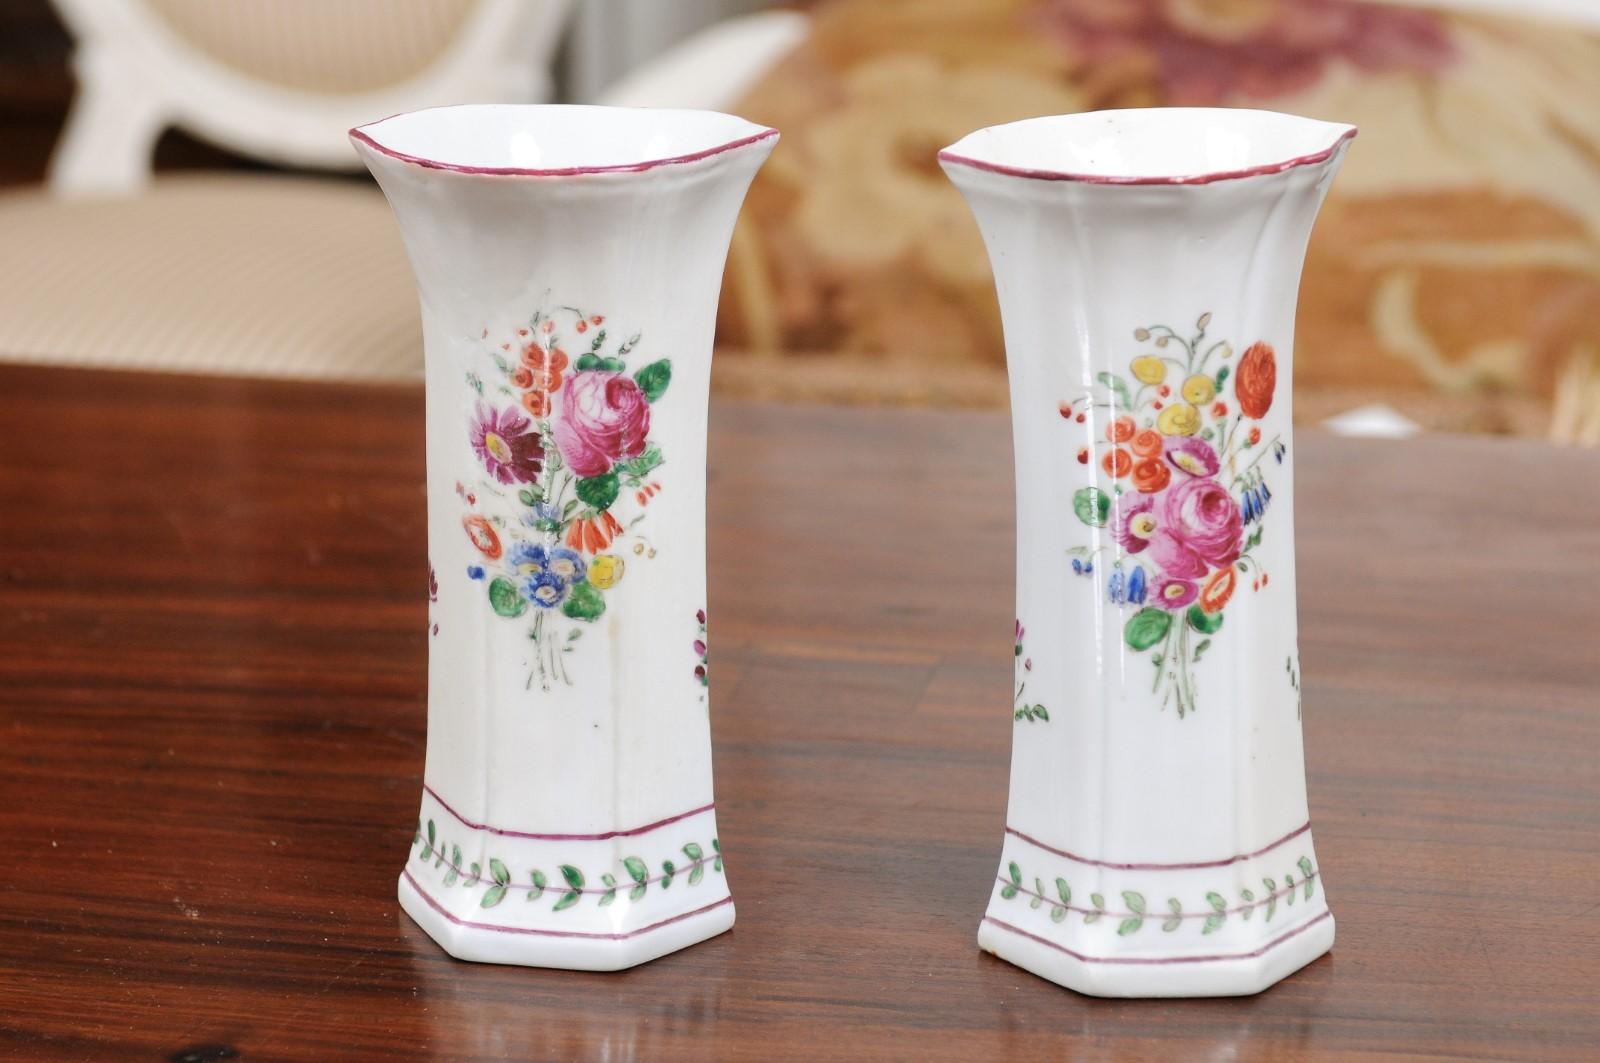 Pair of Italian Porcelain Vases with Colorful Painted Floral Motifs, circa 1805 For Sale 3